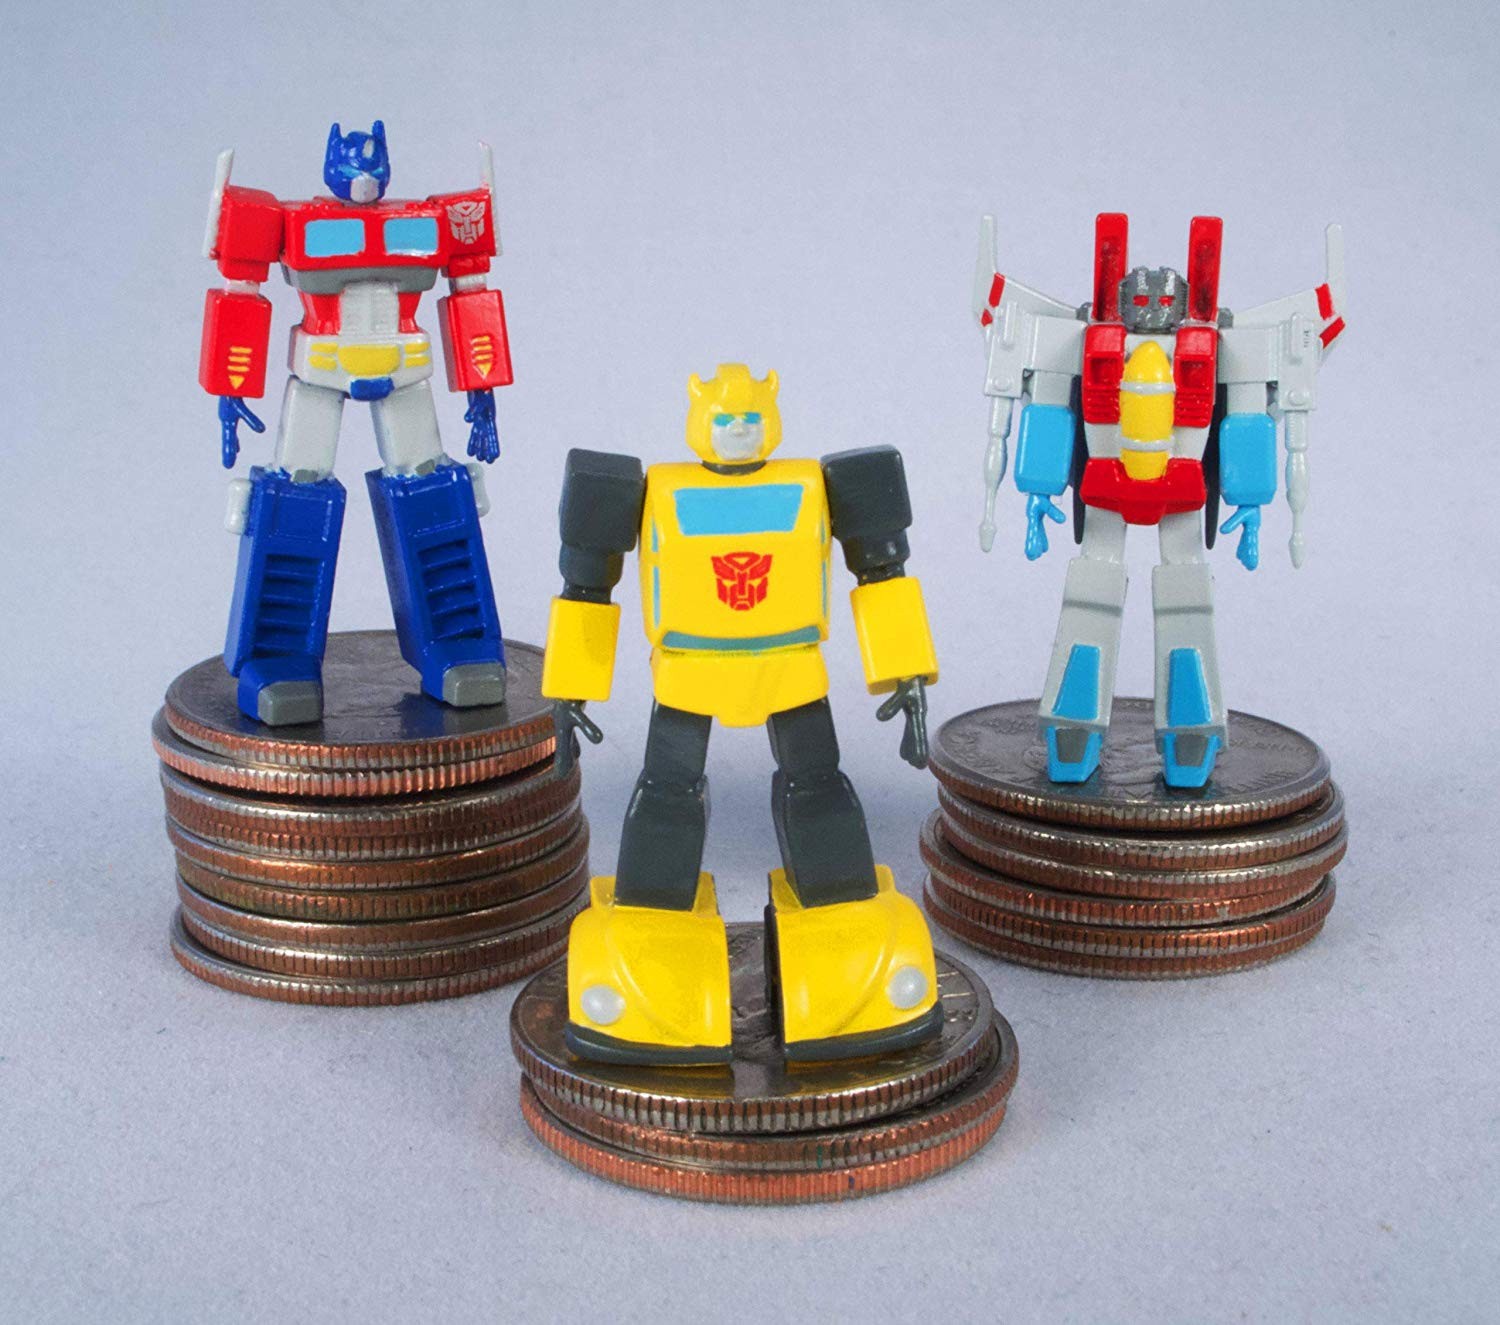 Transformers News: New World's Smallest Transformers 3-Pack Available on Amazon